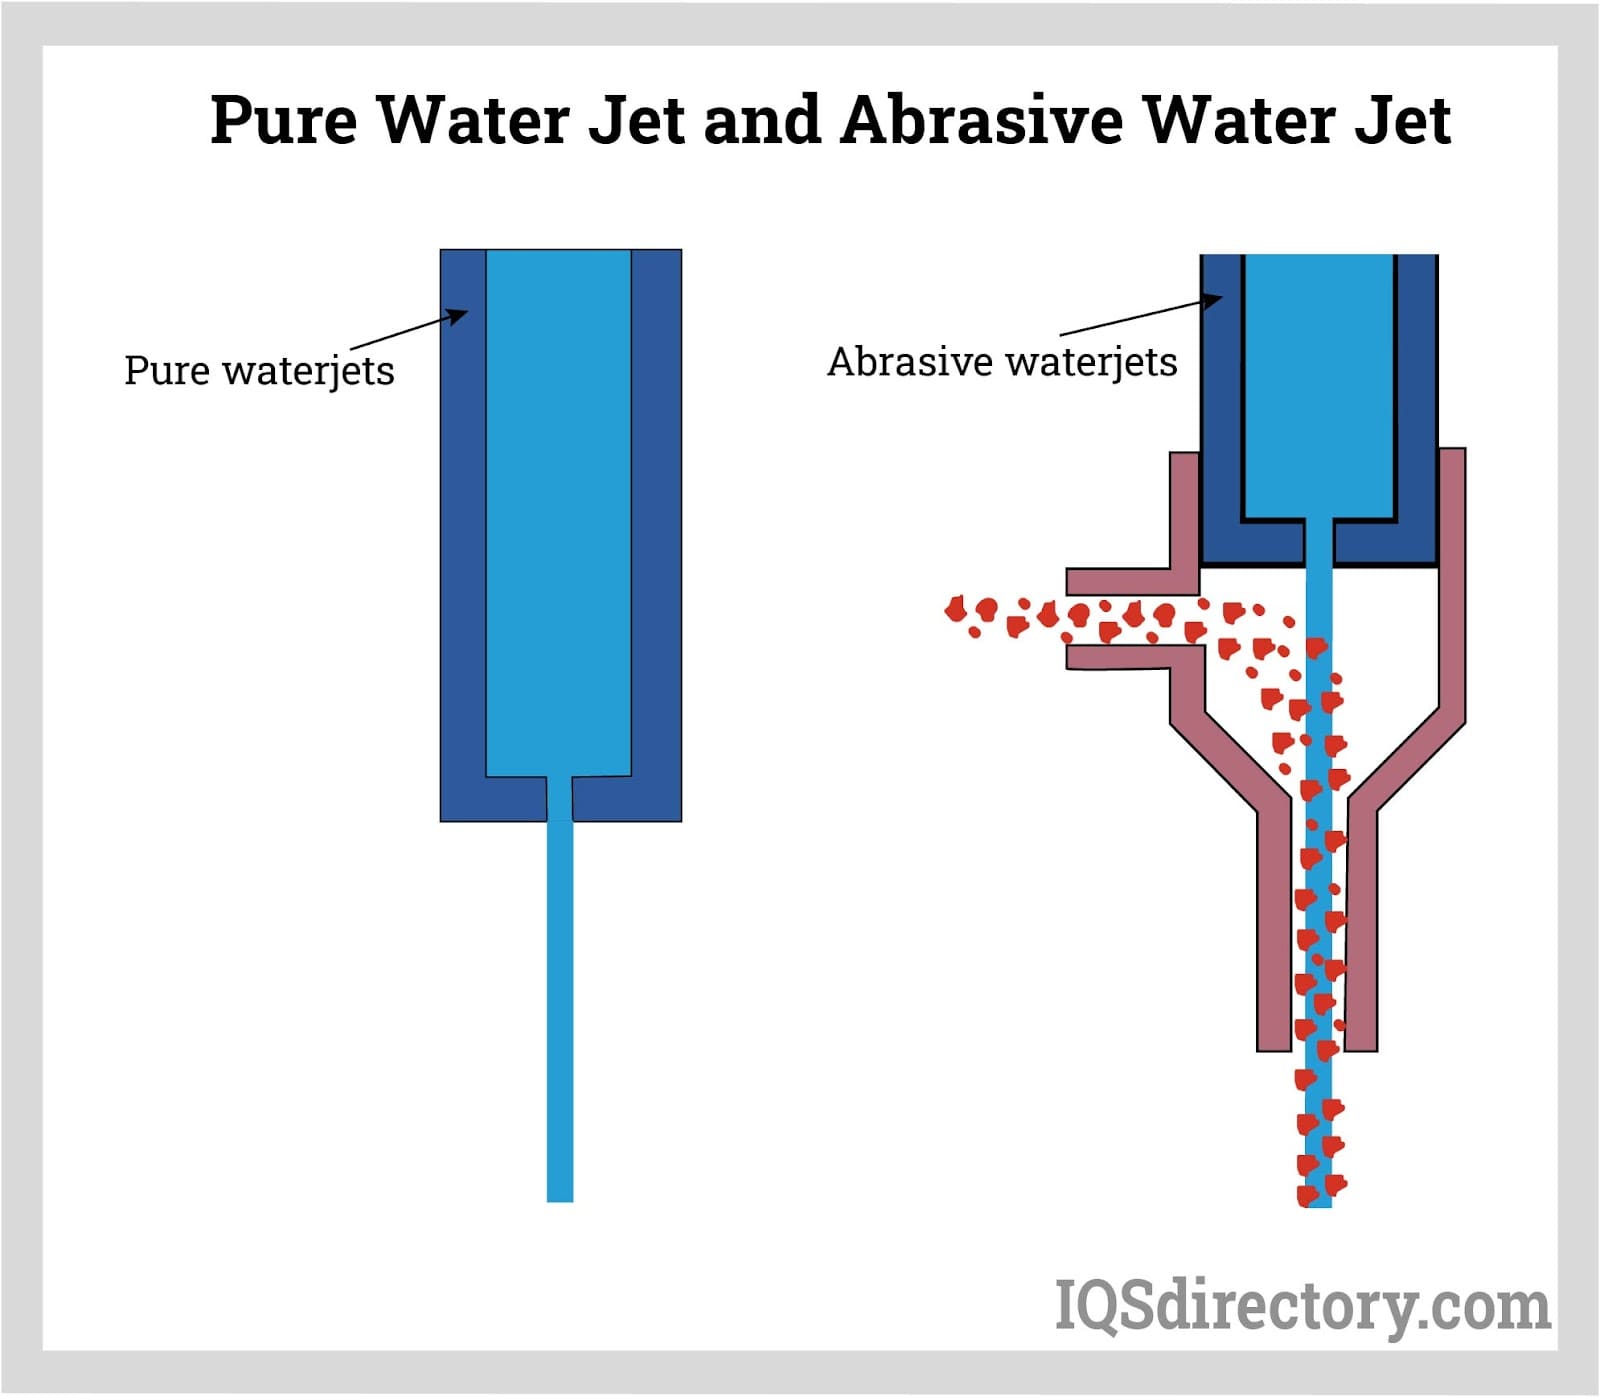 Pure waterjet and Abrasive waterjet cutting